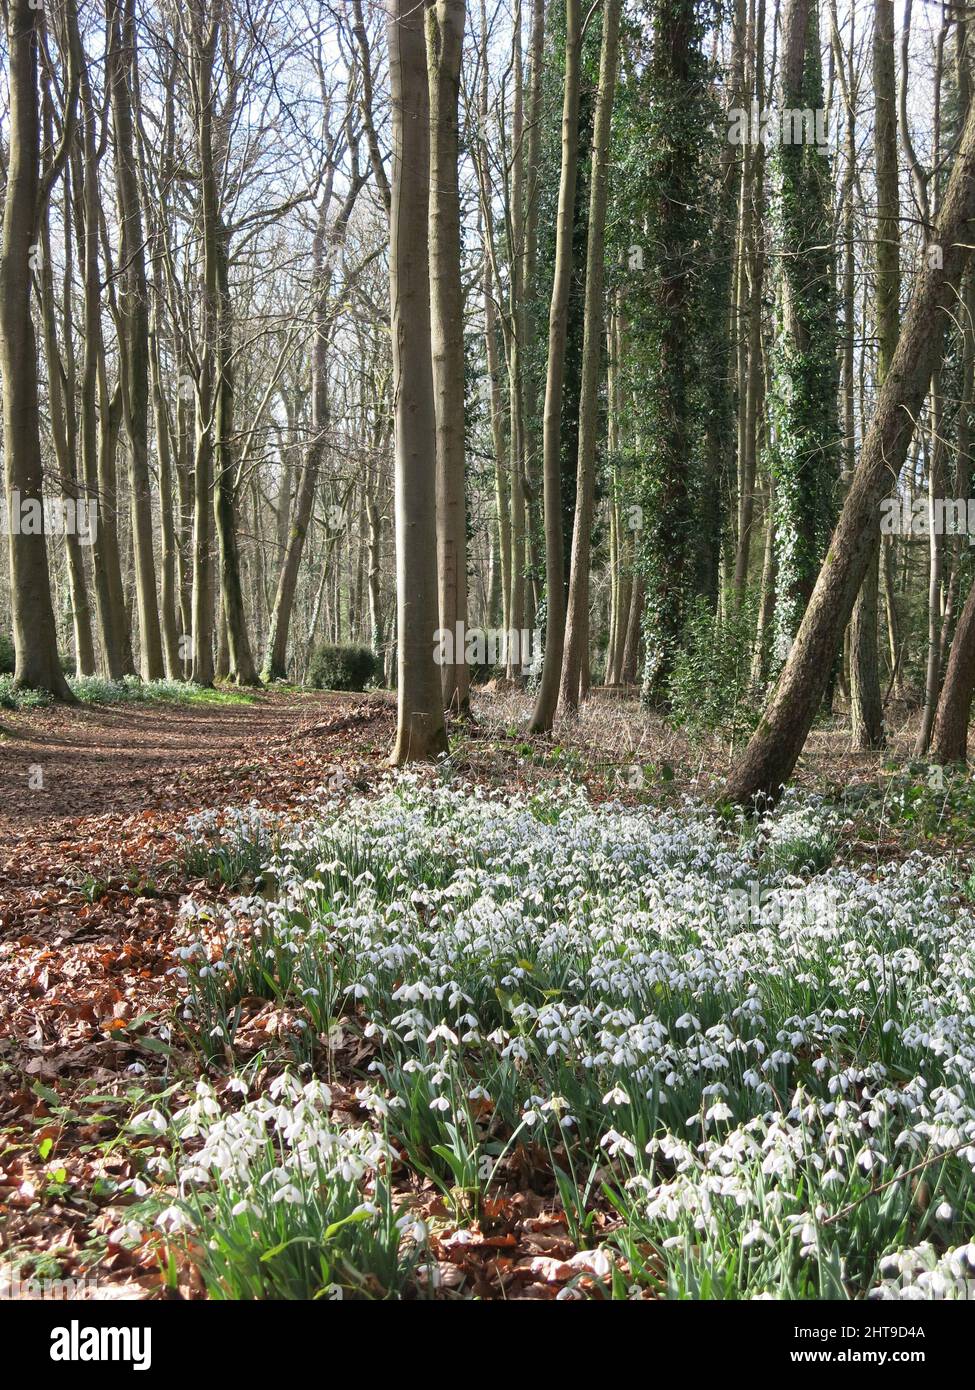 Take a walk through an English woodland in spring to admire the carpets of dainty white snowdrops covering the ground beneath the trees. Stock Photo